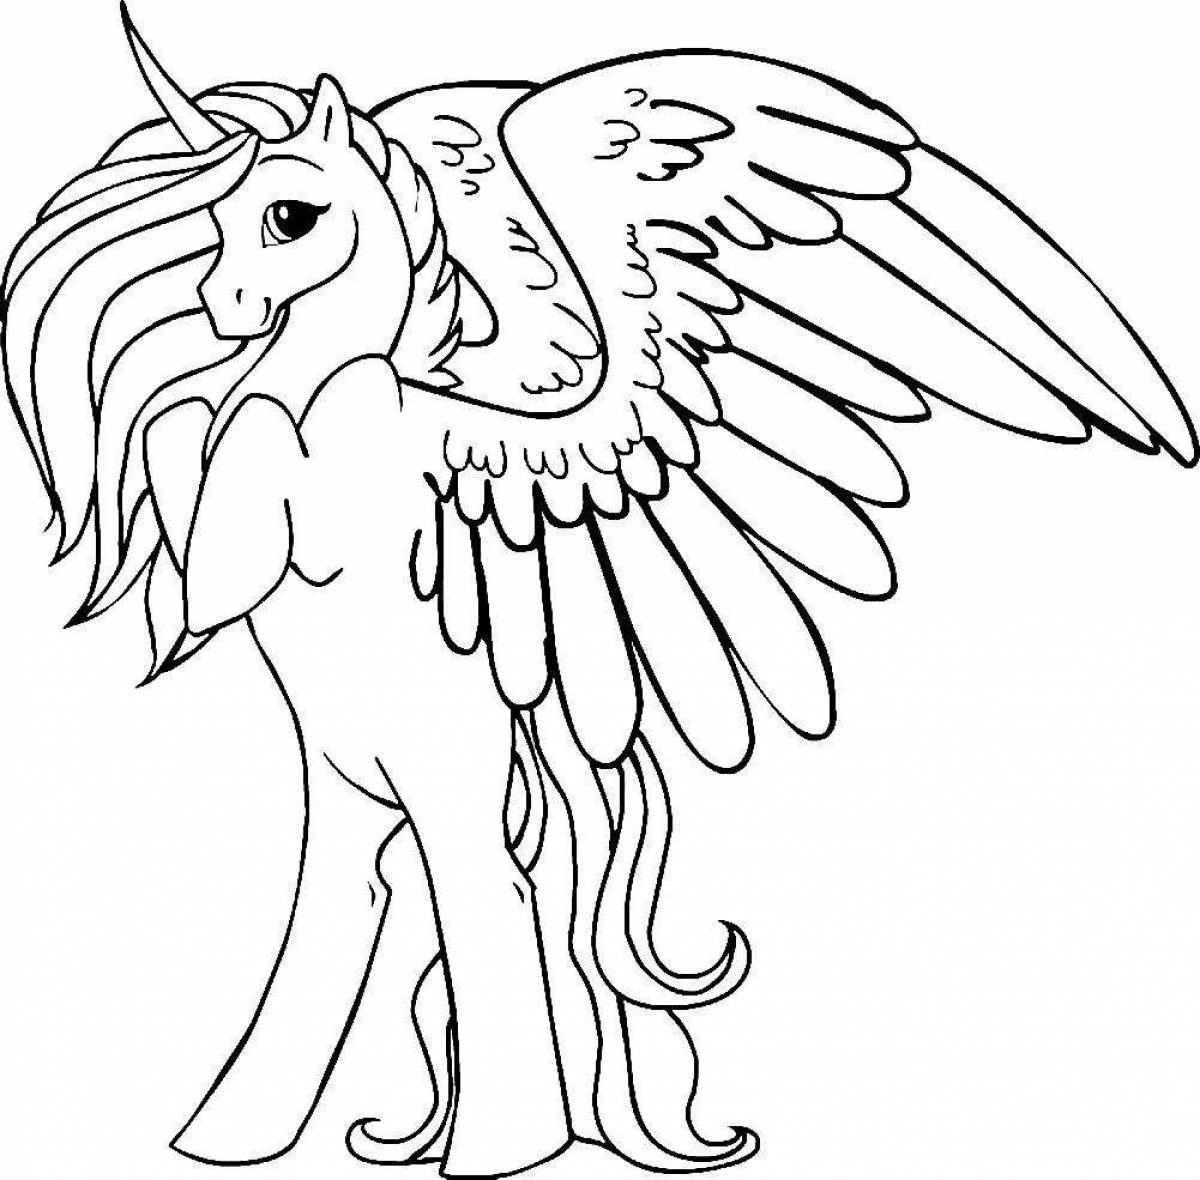 Fairy flying unicorns coloring book